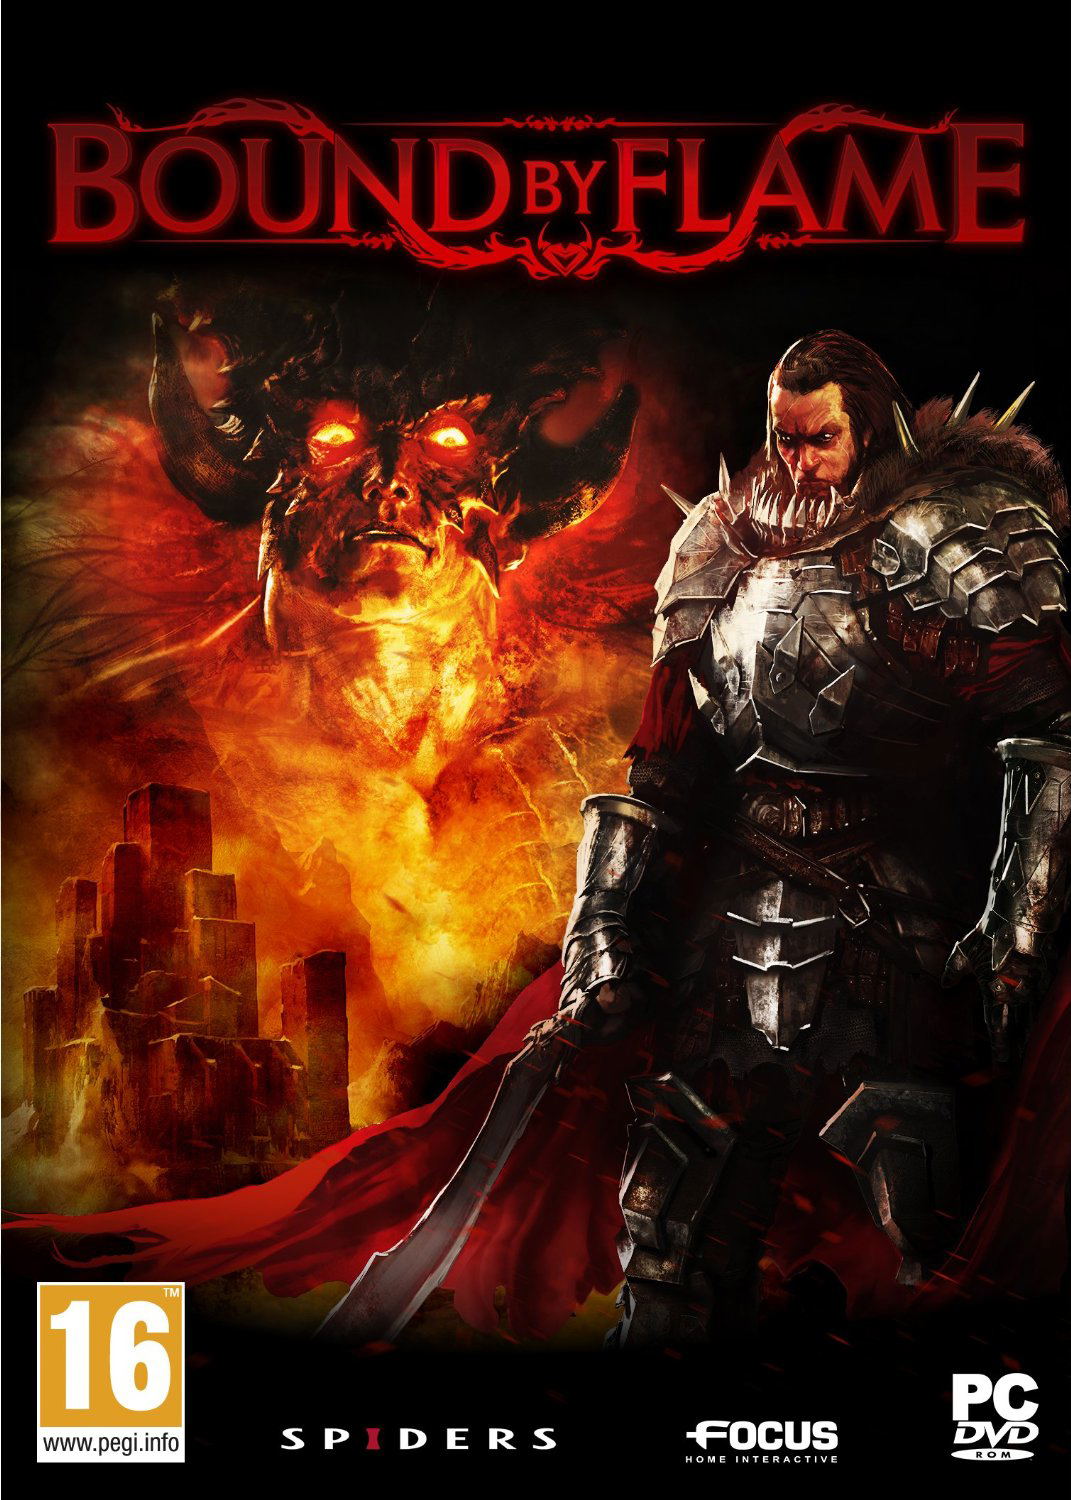 Bound by Flame (DVD-ROM) for Windows